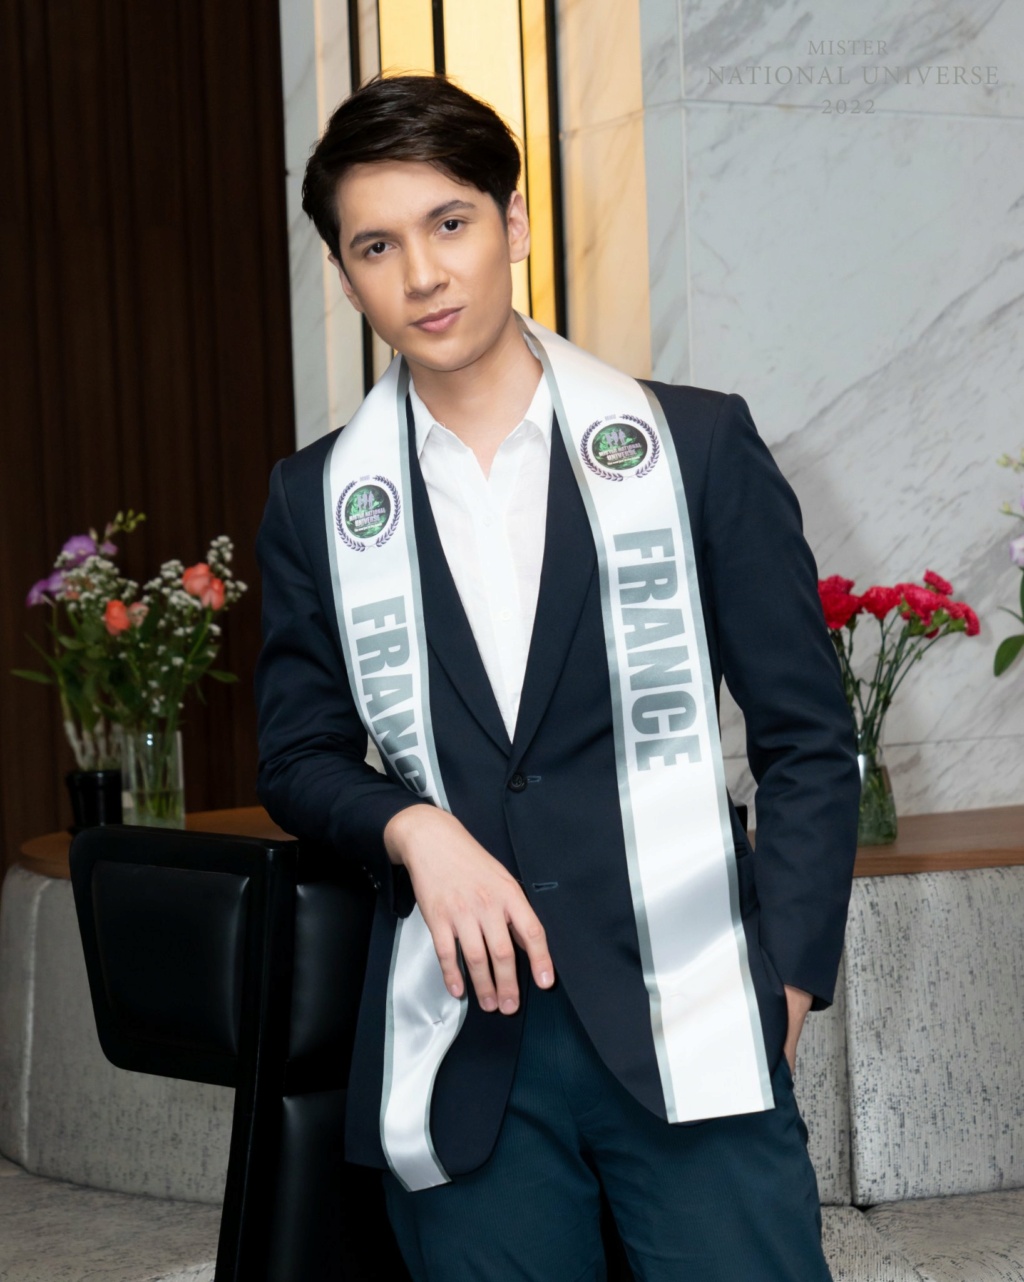 Mister National Universe 2022 is Việt Hoàng from Vietnam 28504110